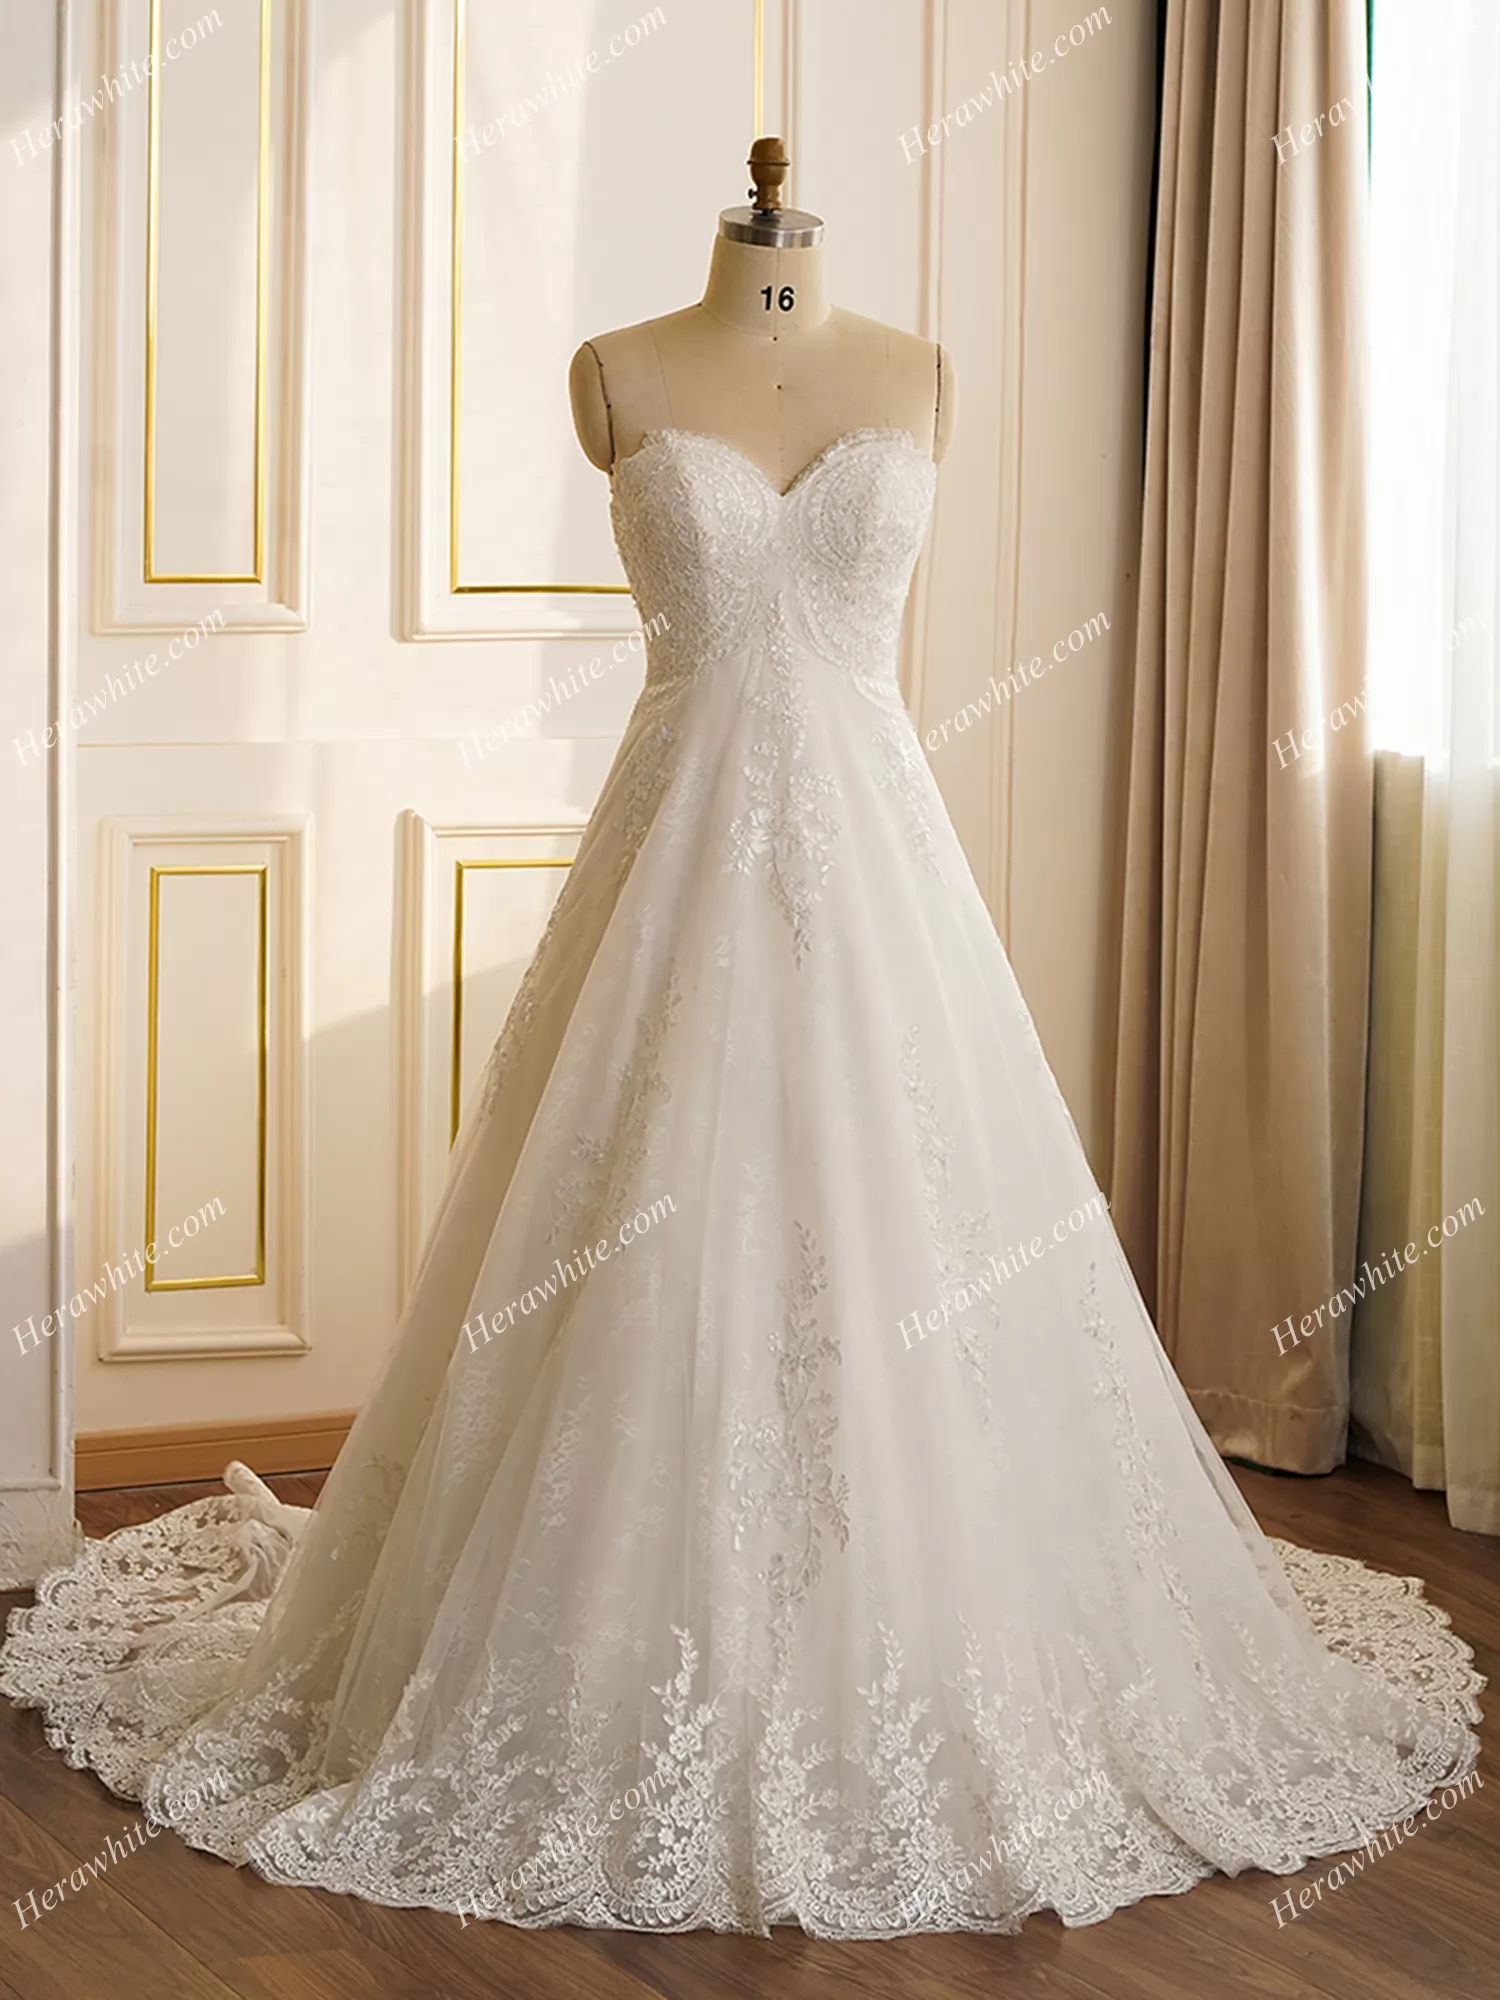 Strapless Whole Lace Count Train Wedding Dress